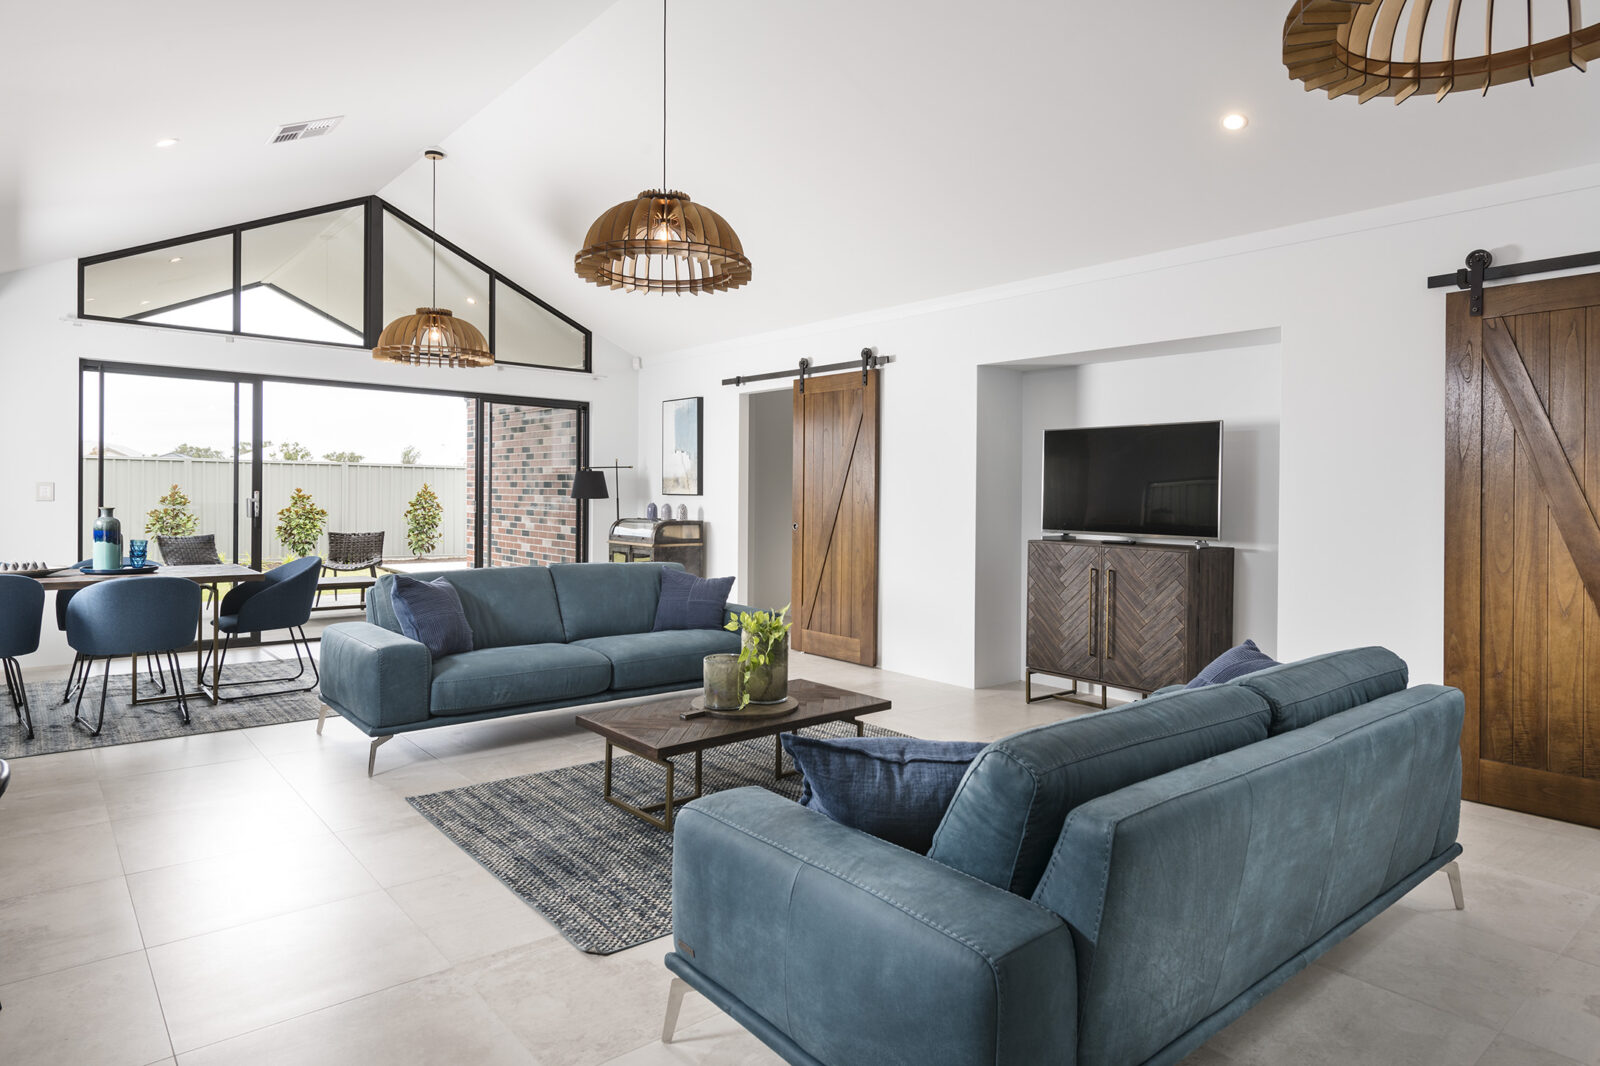 Living room of the Augusta Display, with rustic and modern elements by Plunkett Homes.